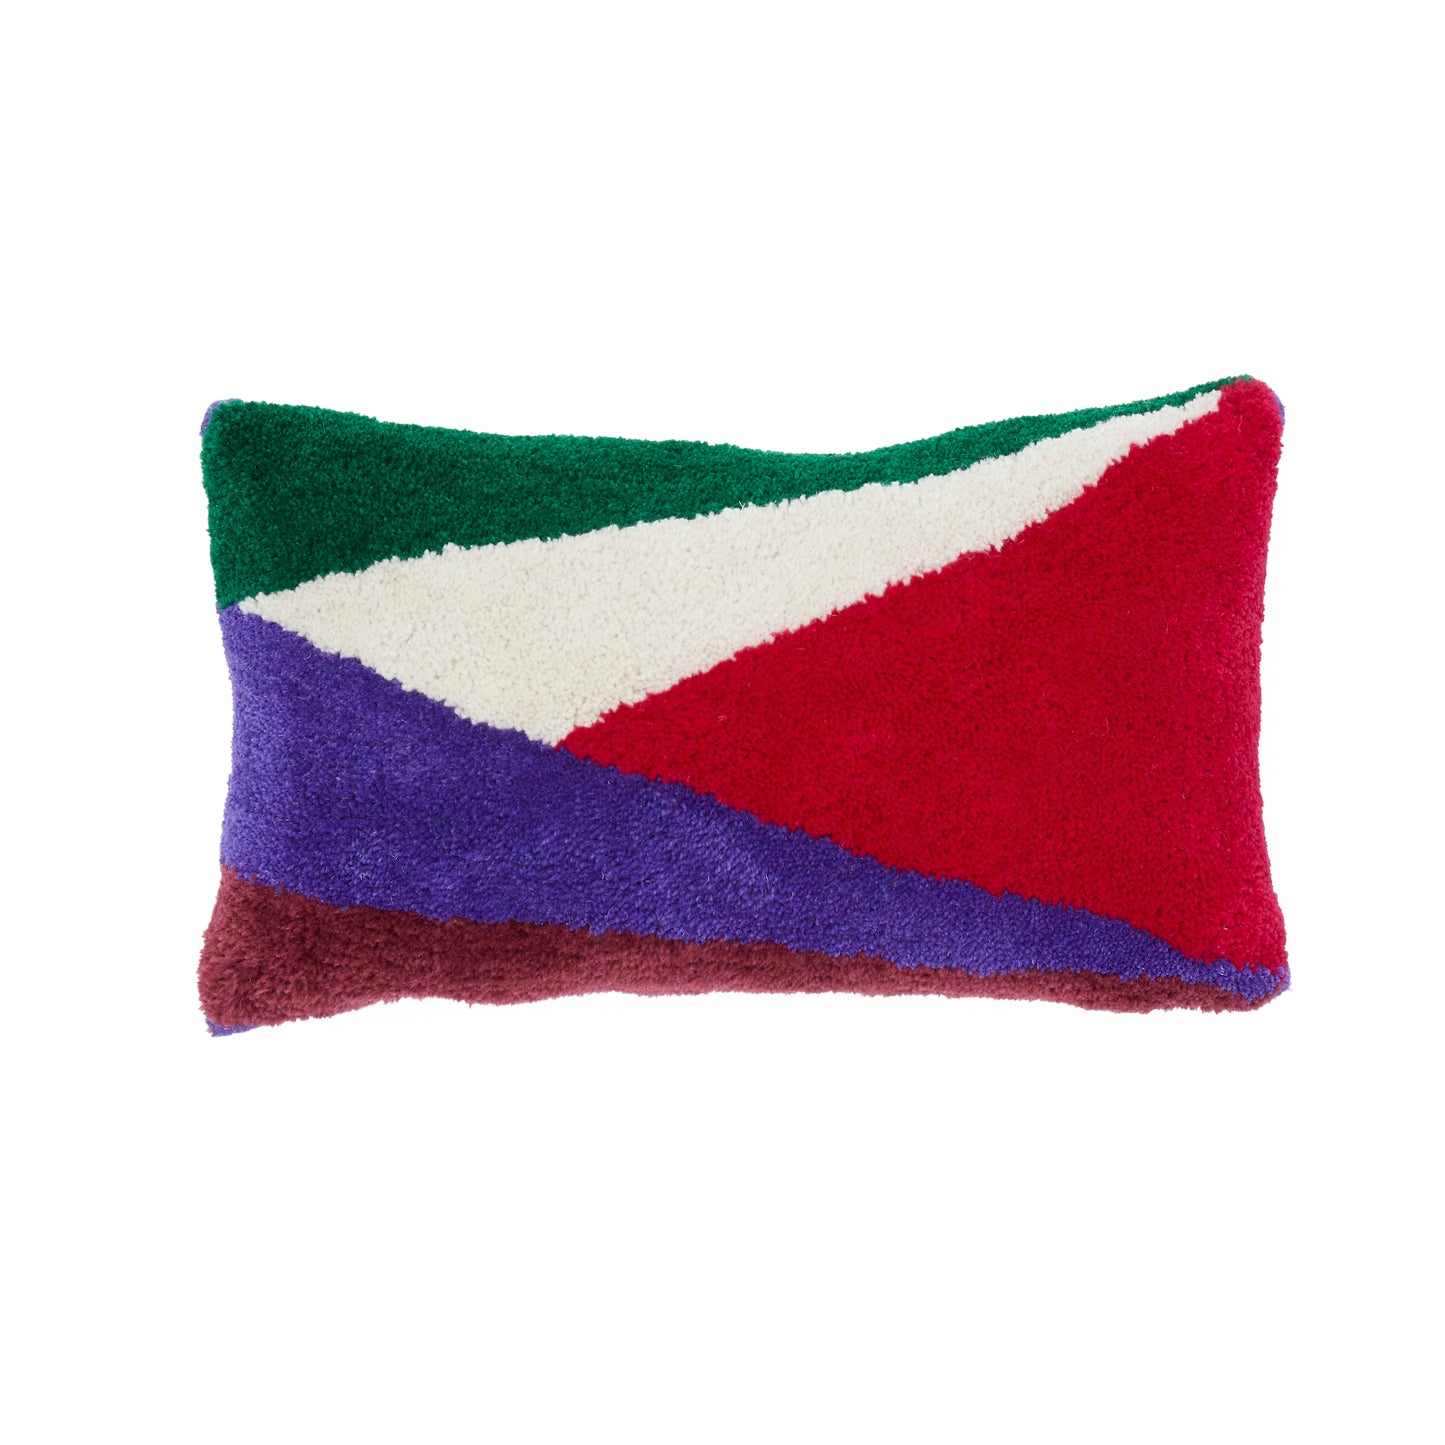 WATERMELON PURPLE, PINK AND GREEN TUFTED CUSHION